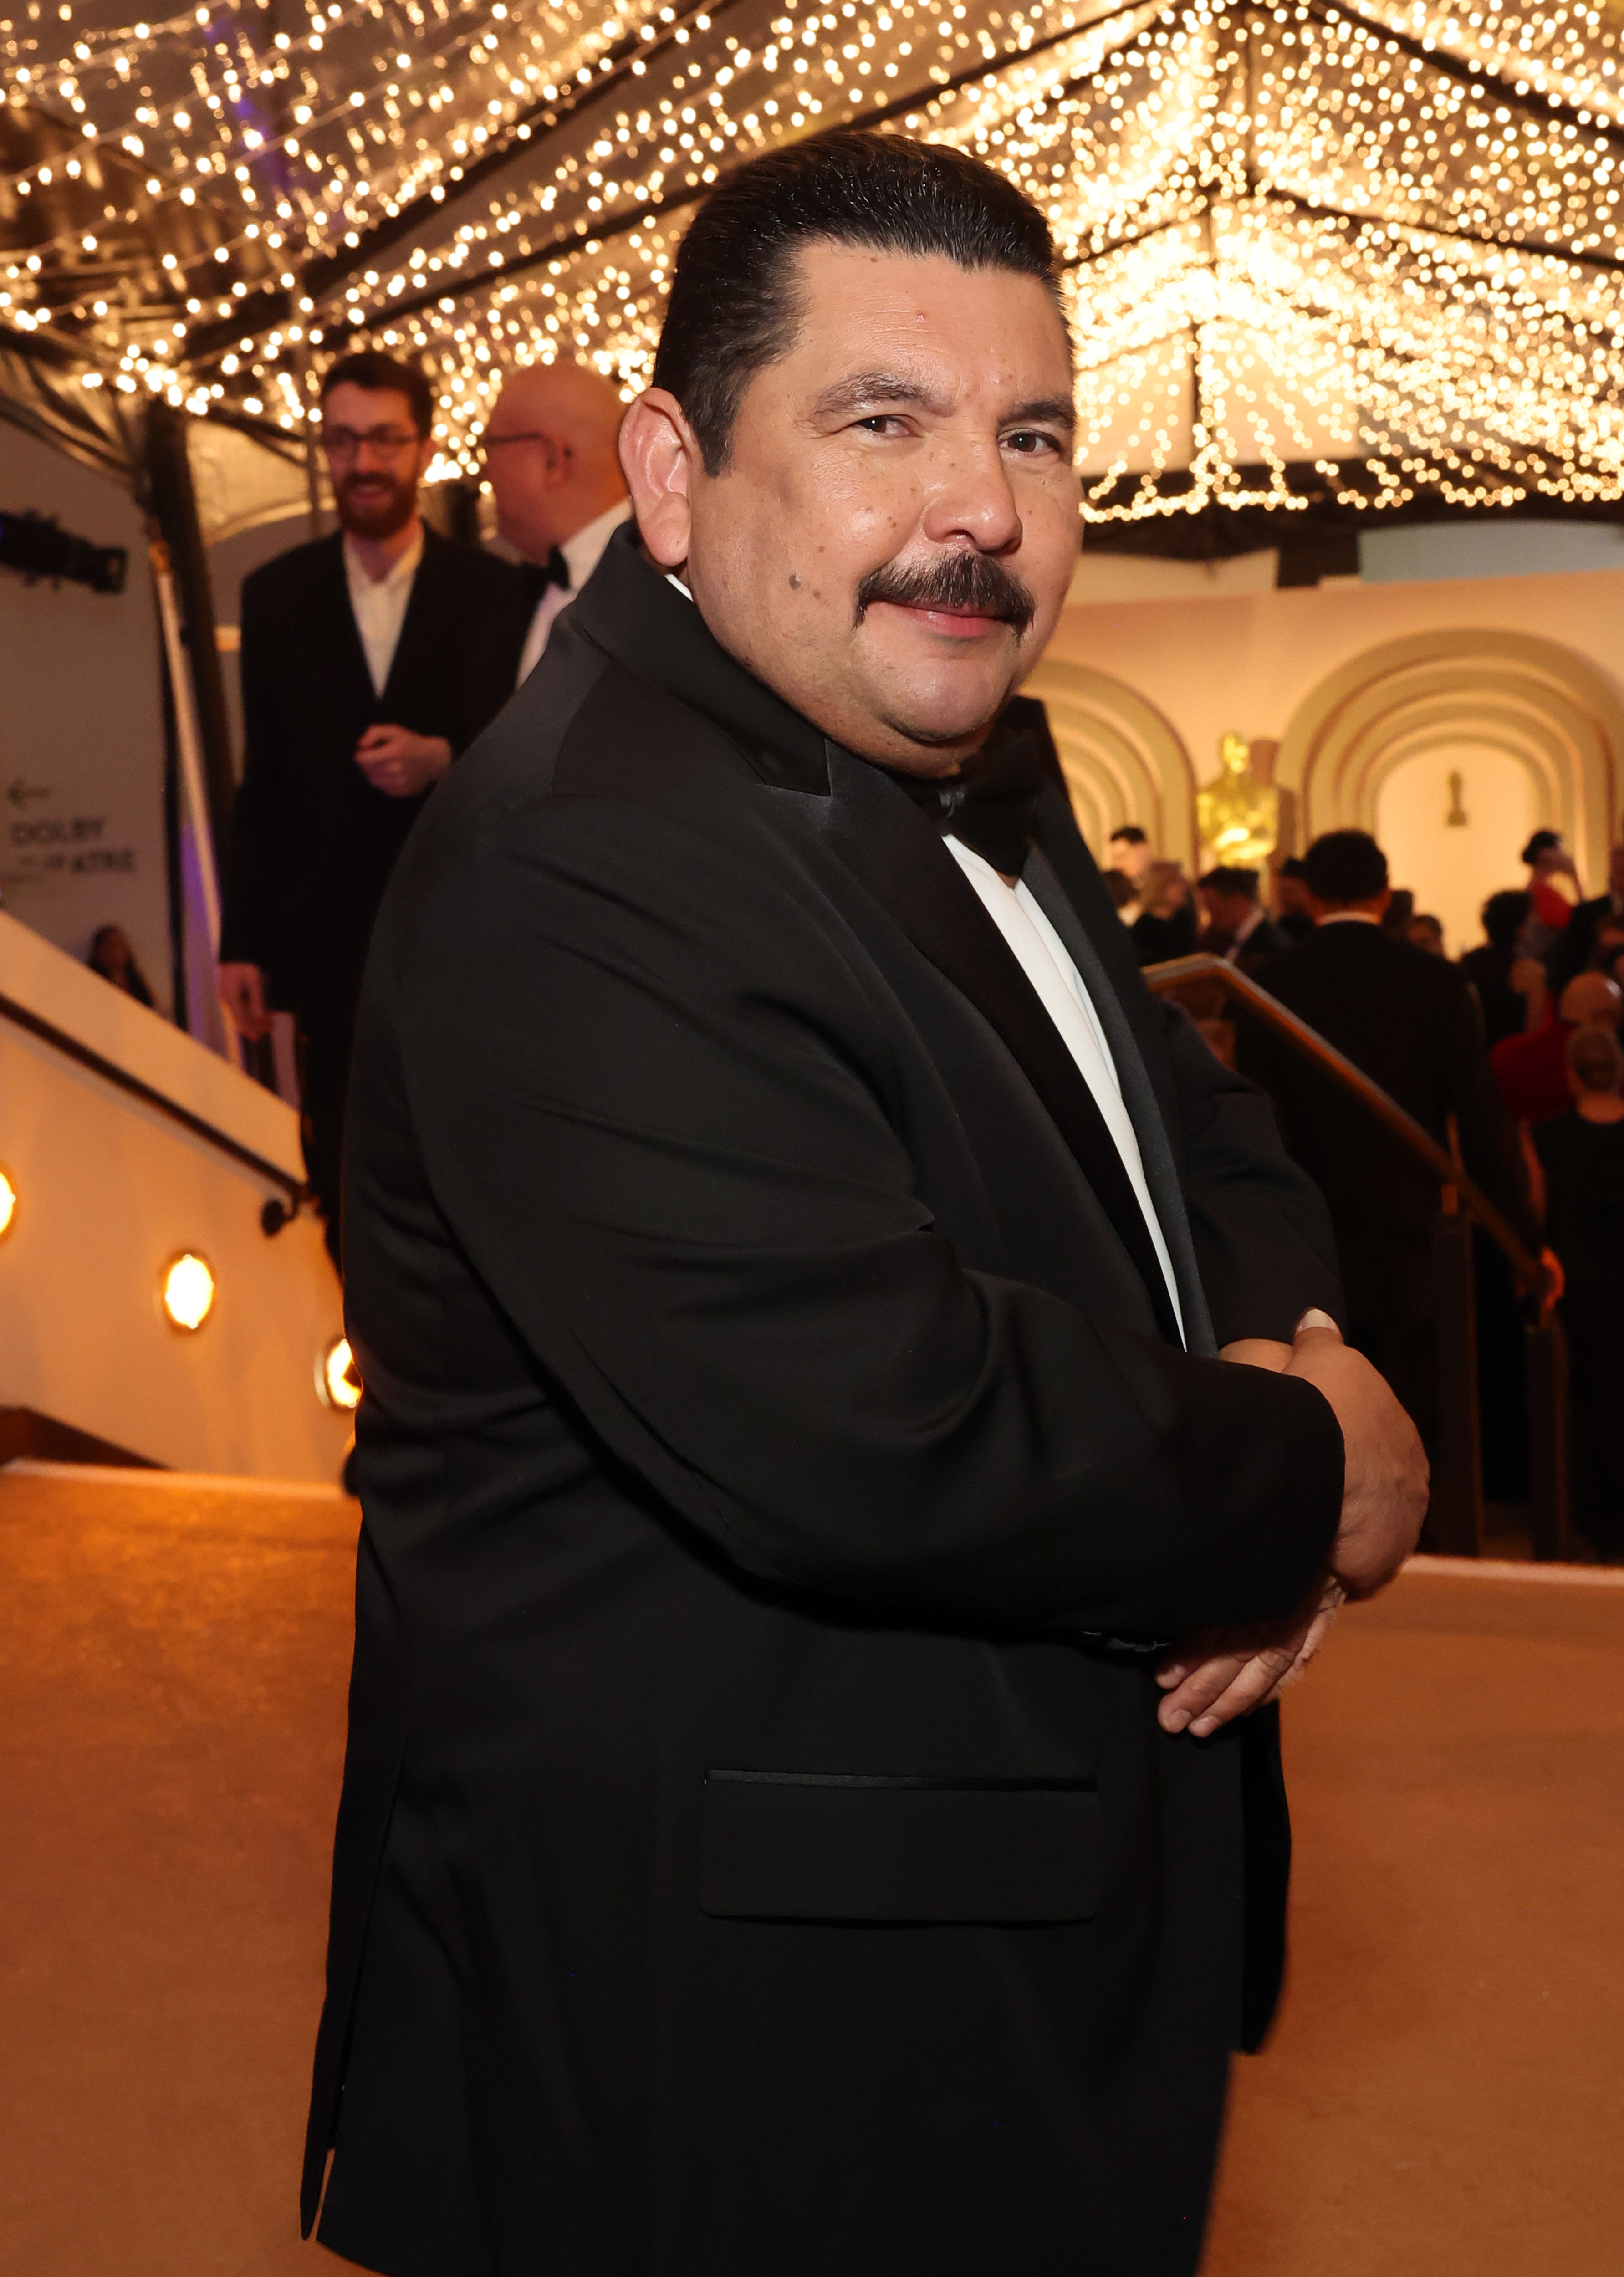 Guillermo Rodriguez from Jimmy Kimmel Live in a suit with bow-tie, arms crossed, smiling